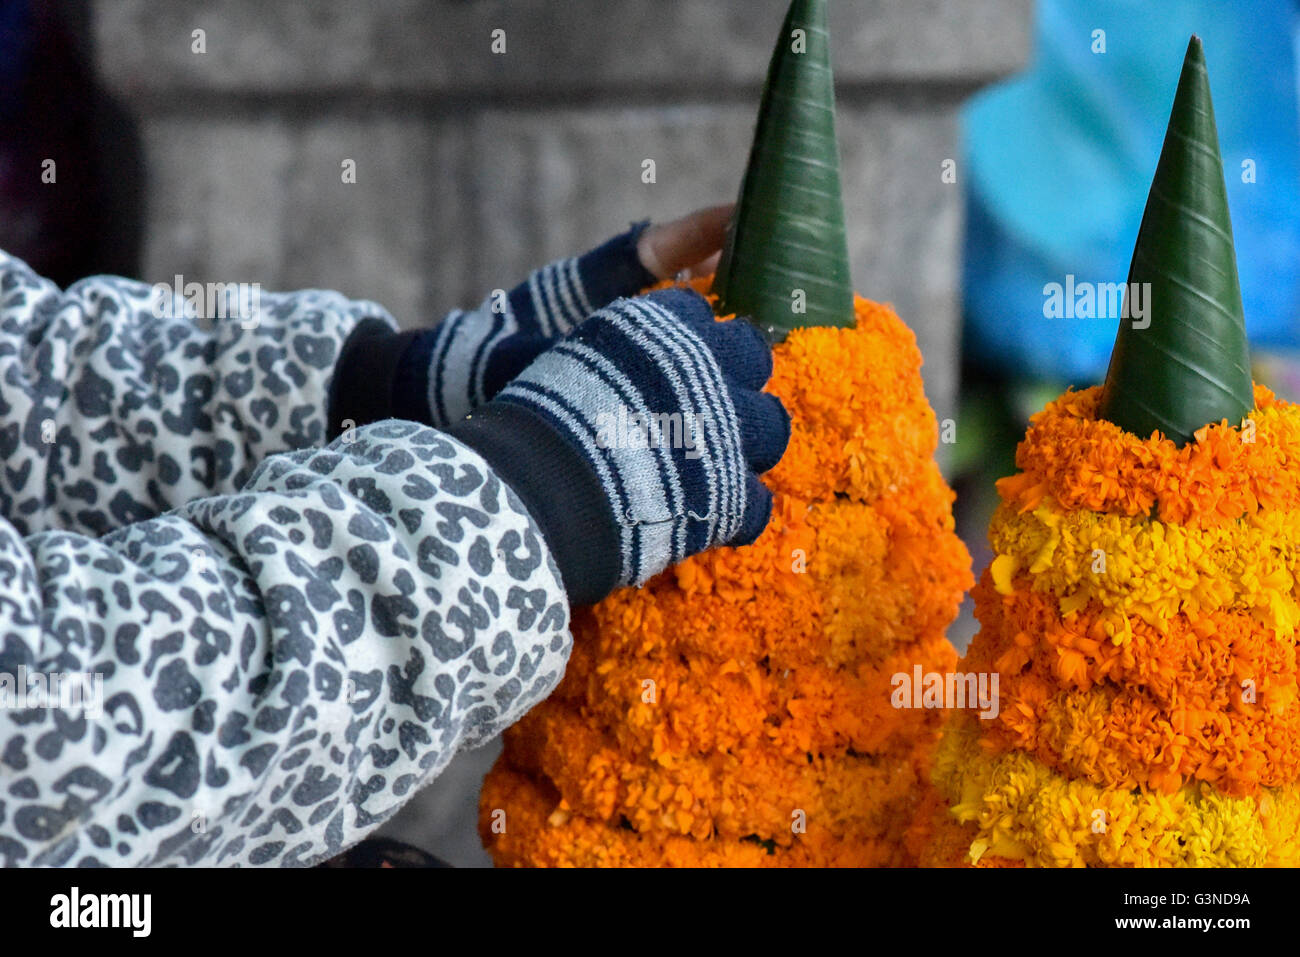 “Banana-leaf tower” (Kong Than) made with orange flowers typically used for rituals and ceremonies in Laos Stock Photo